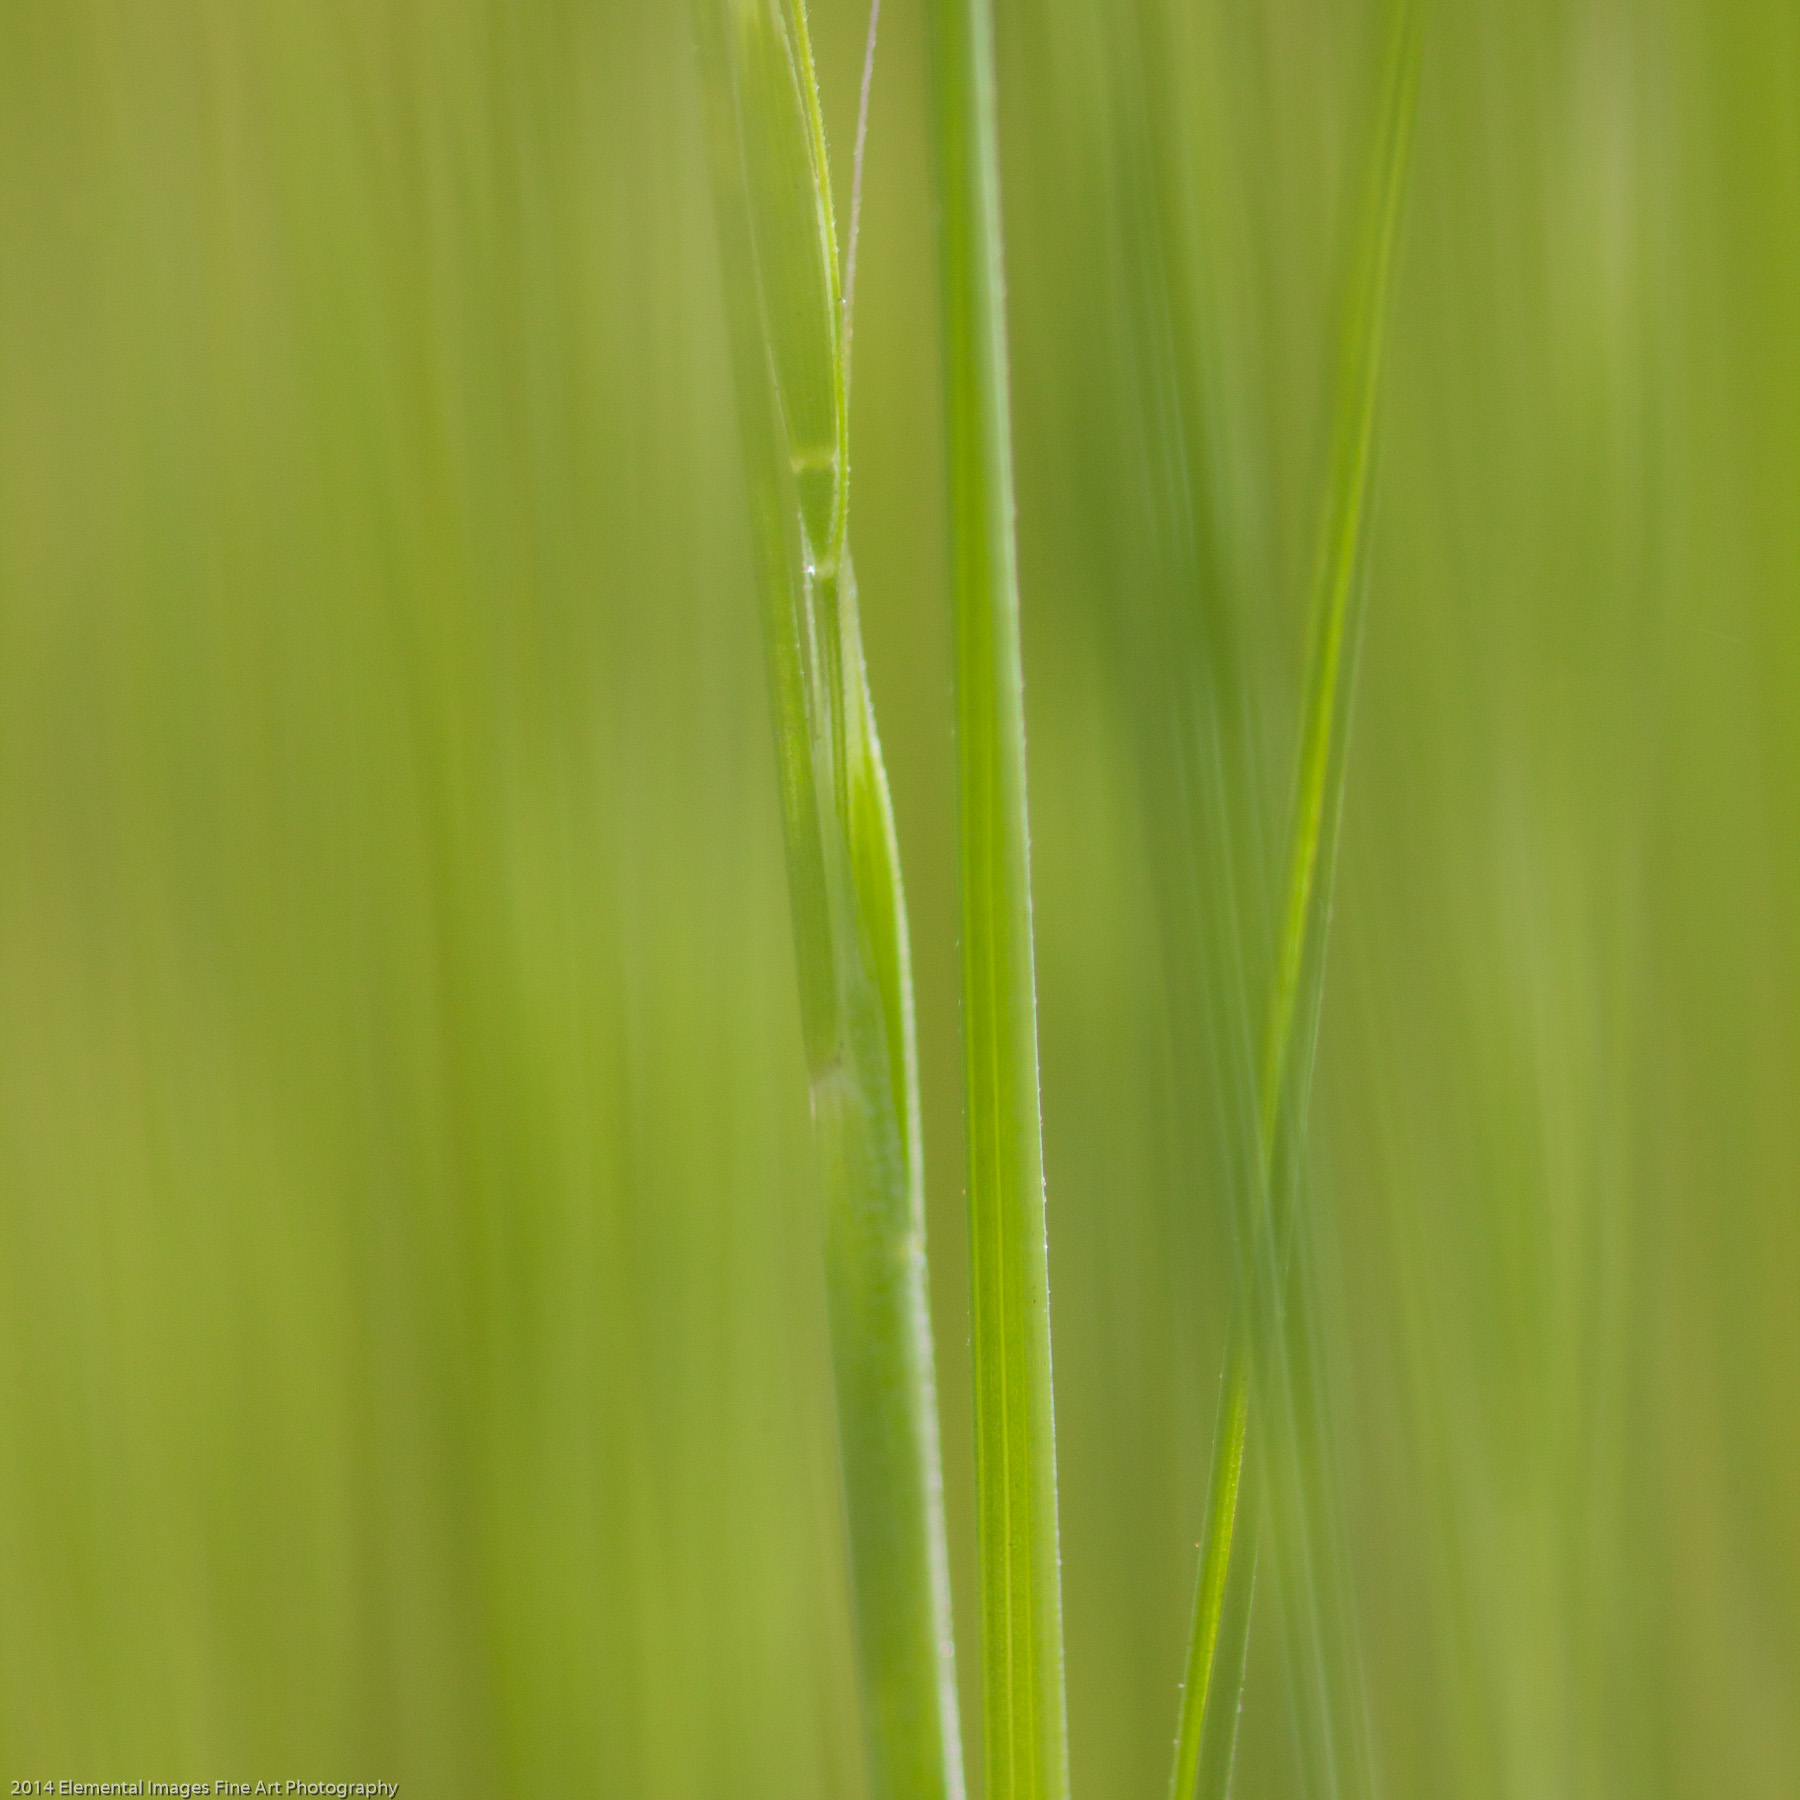 Grasses CXXXII | The Palouse | WA | USA - © 2014 Elemental Images Fine Art Photography - All Rights Reserved Worldwide